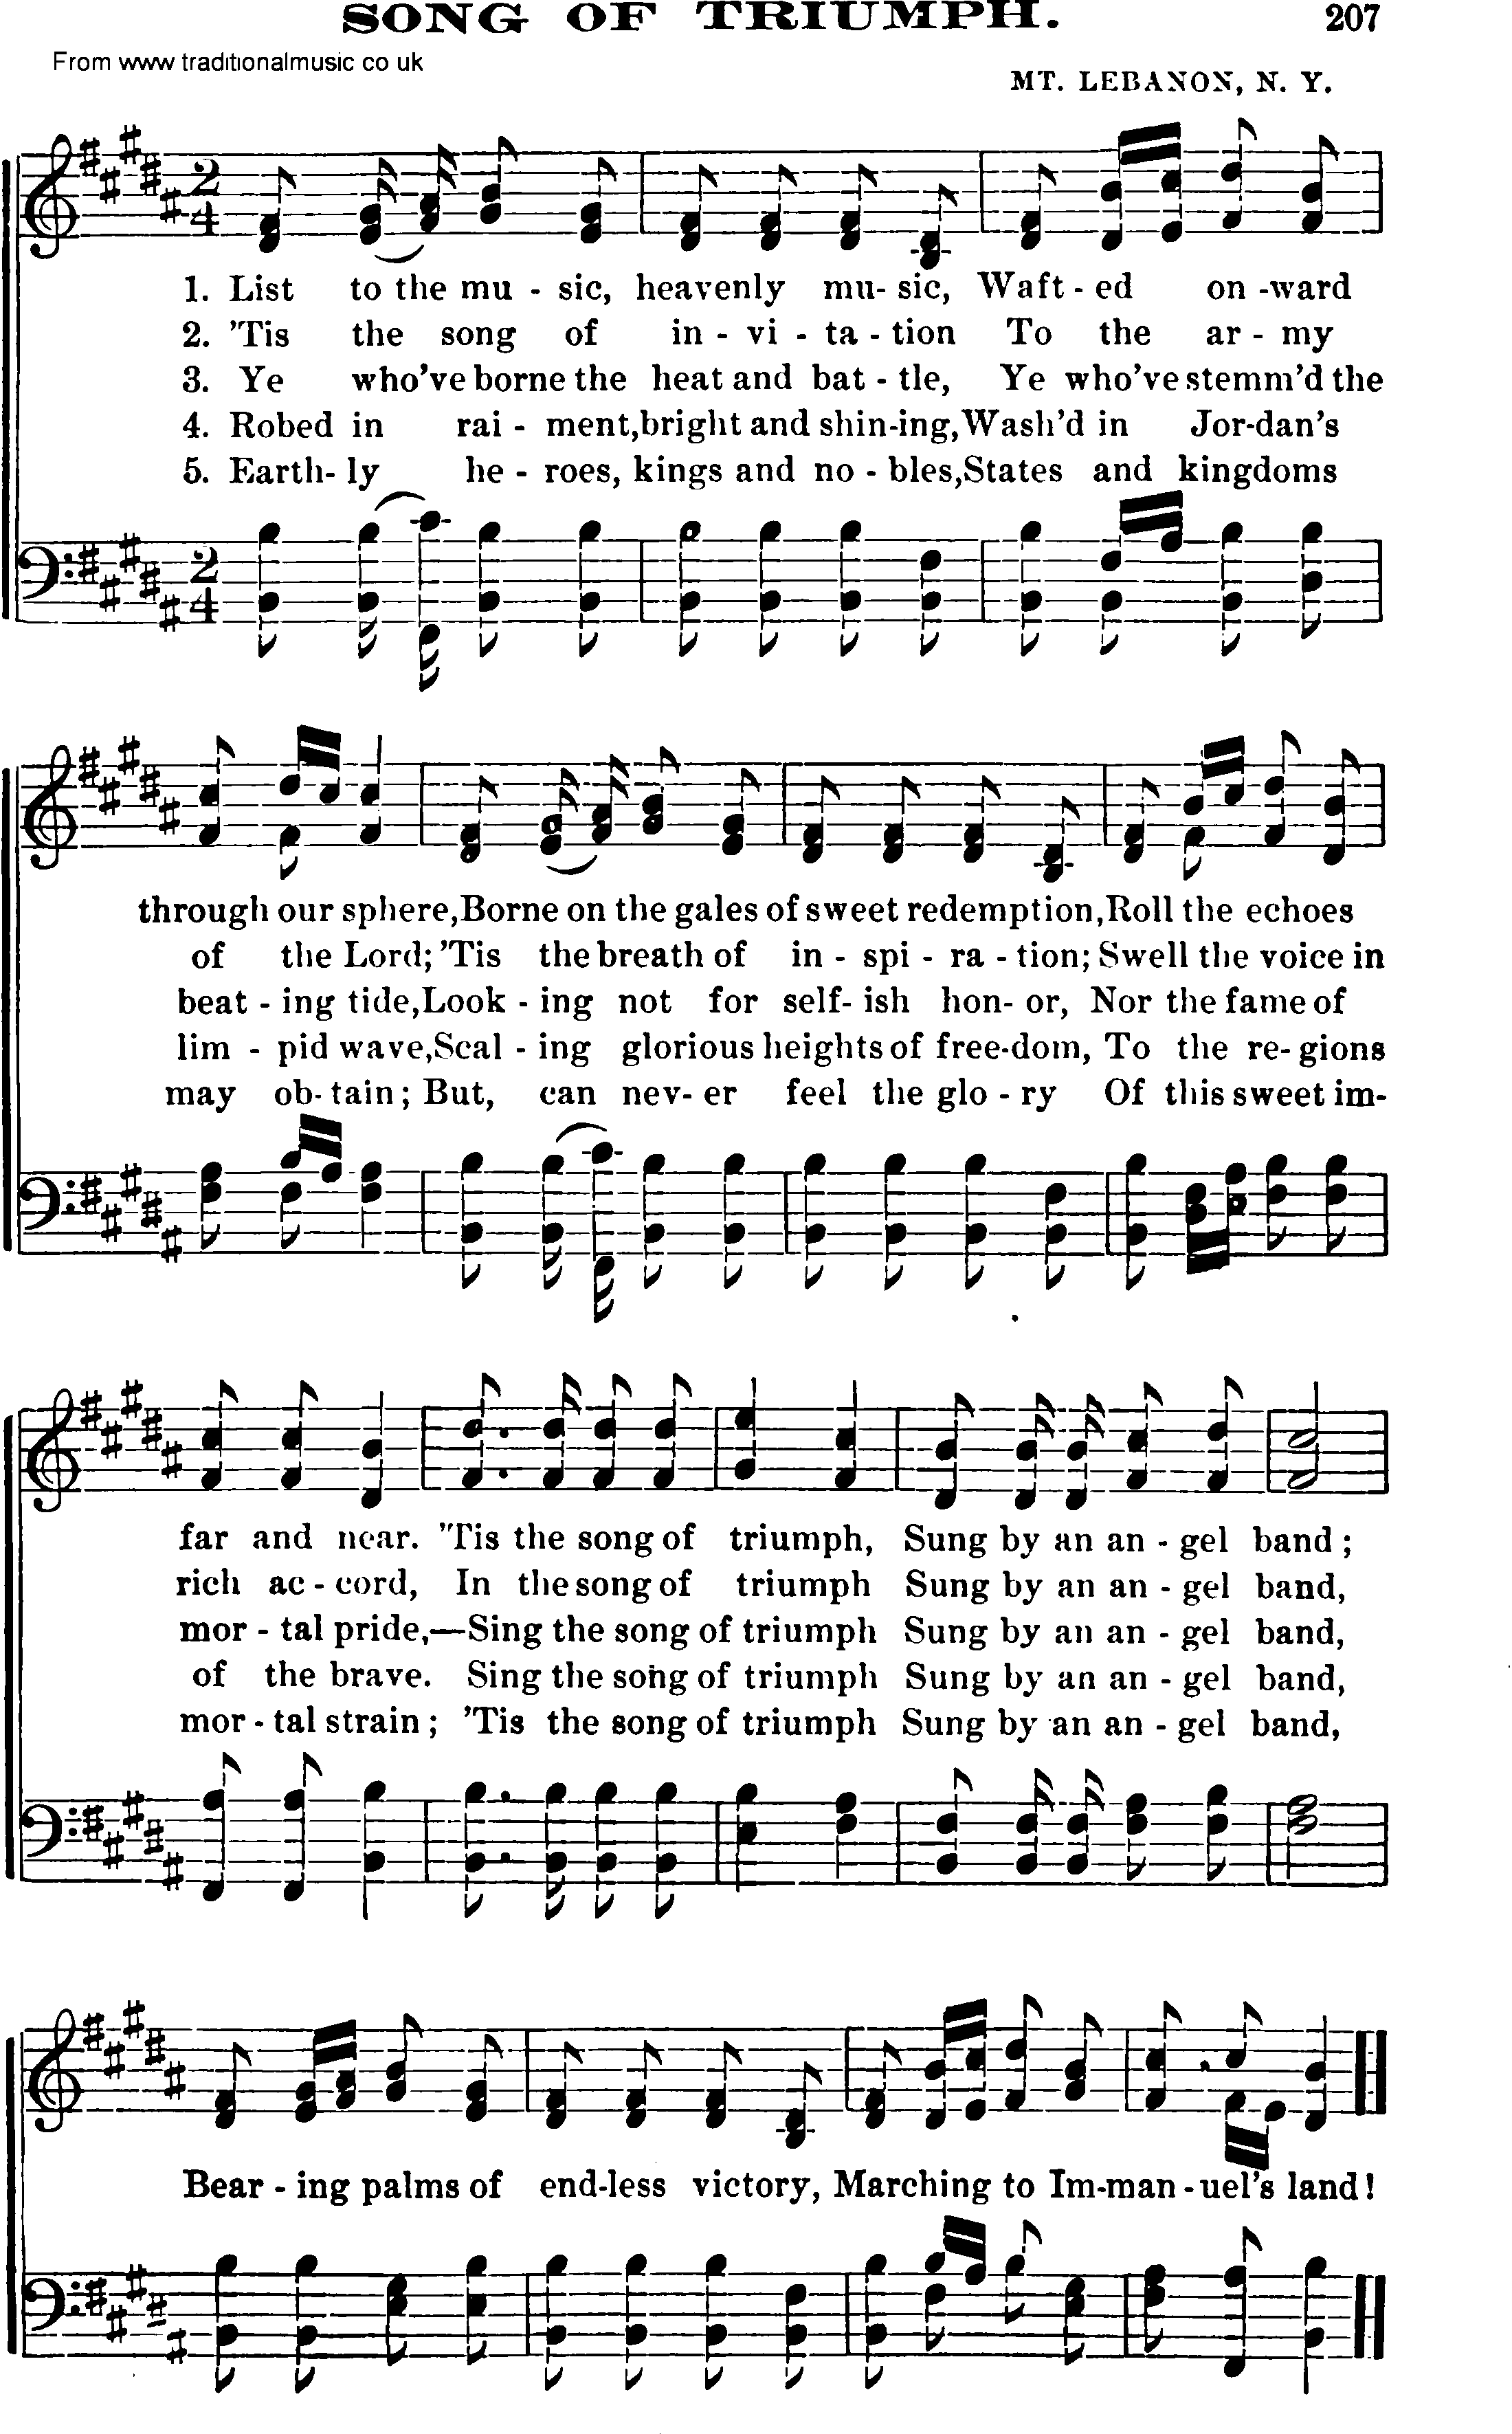 Shaker Music collection, Hymn: Song Of Triumph, sheetmusic and PDF